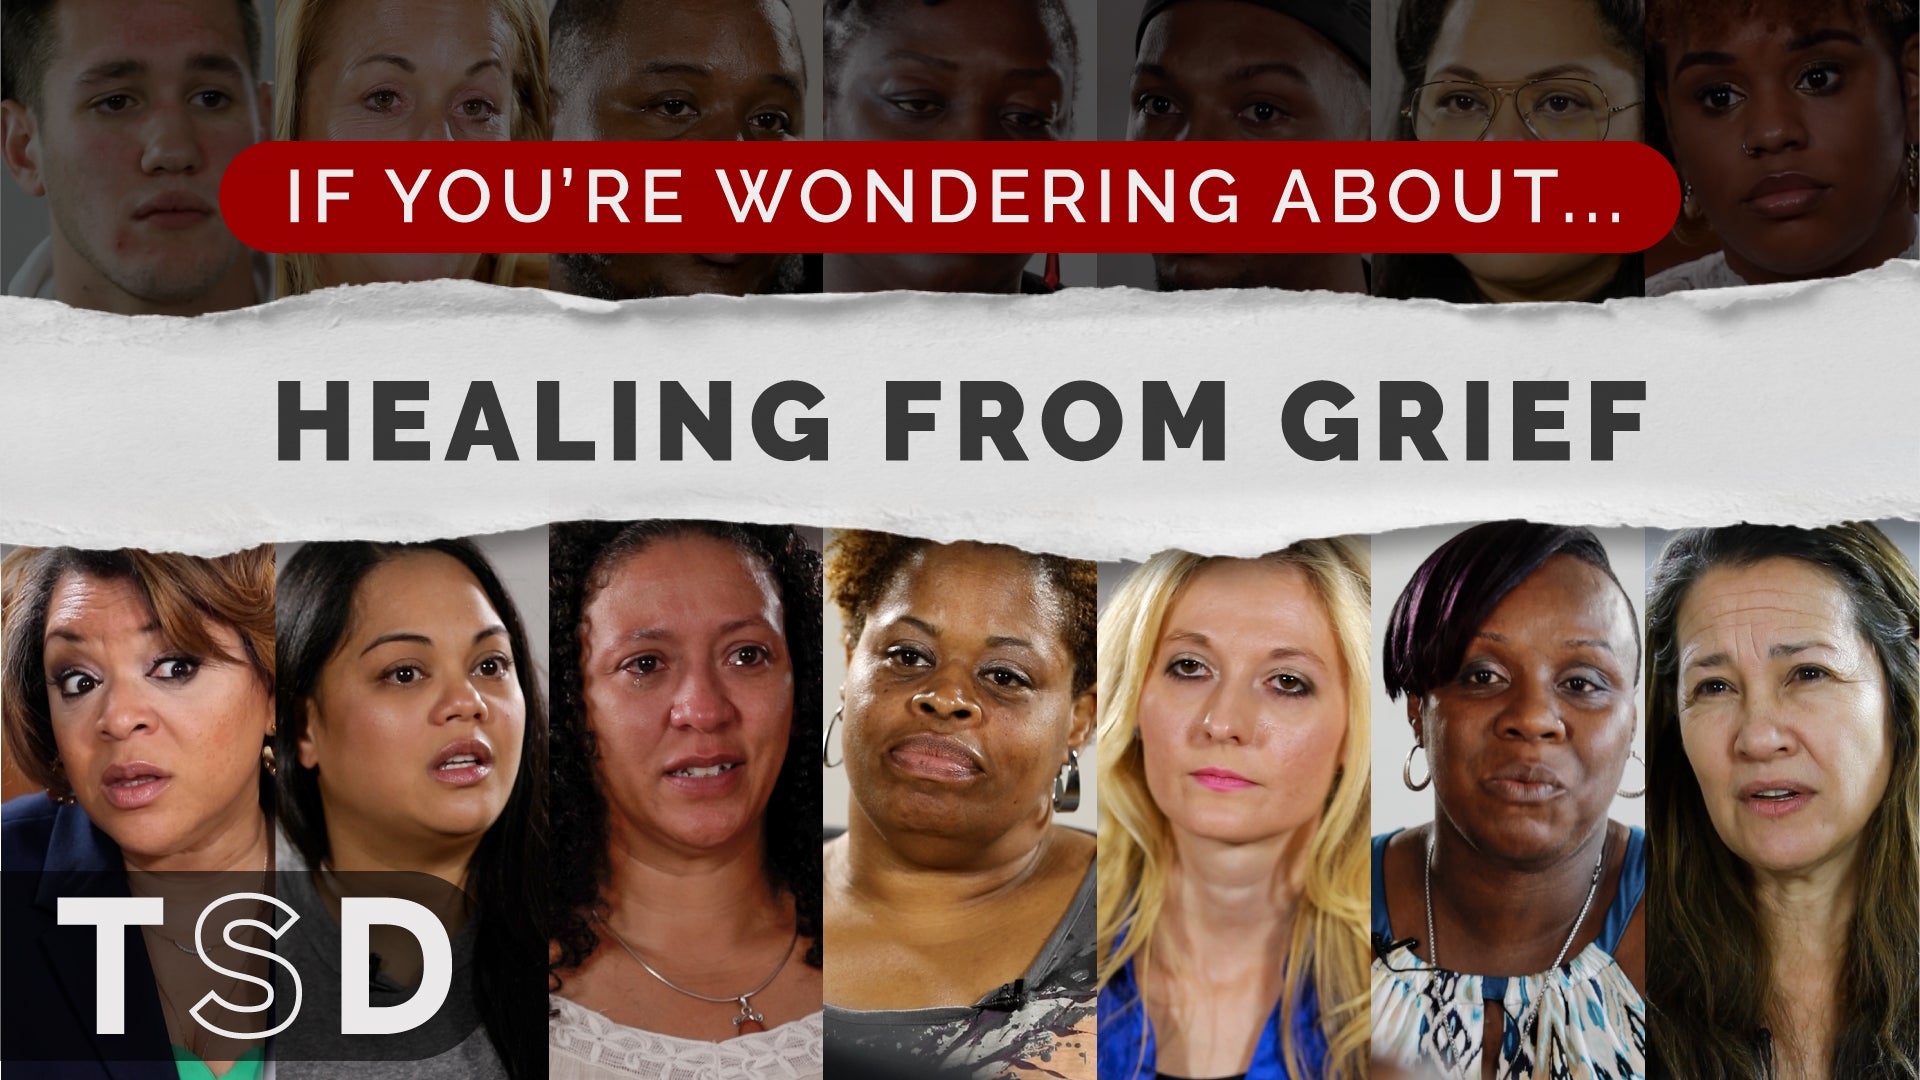 [VIDEO] If You're Wondering About: Healing From Grief